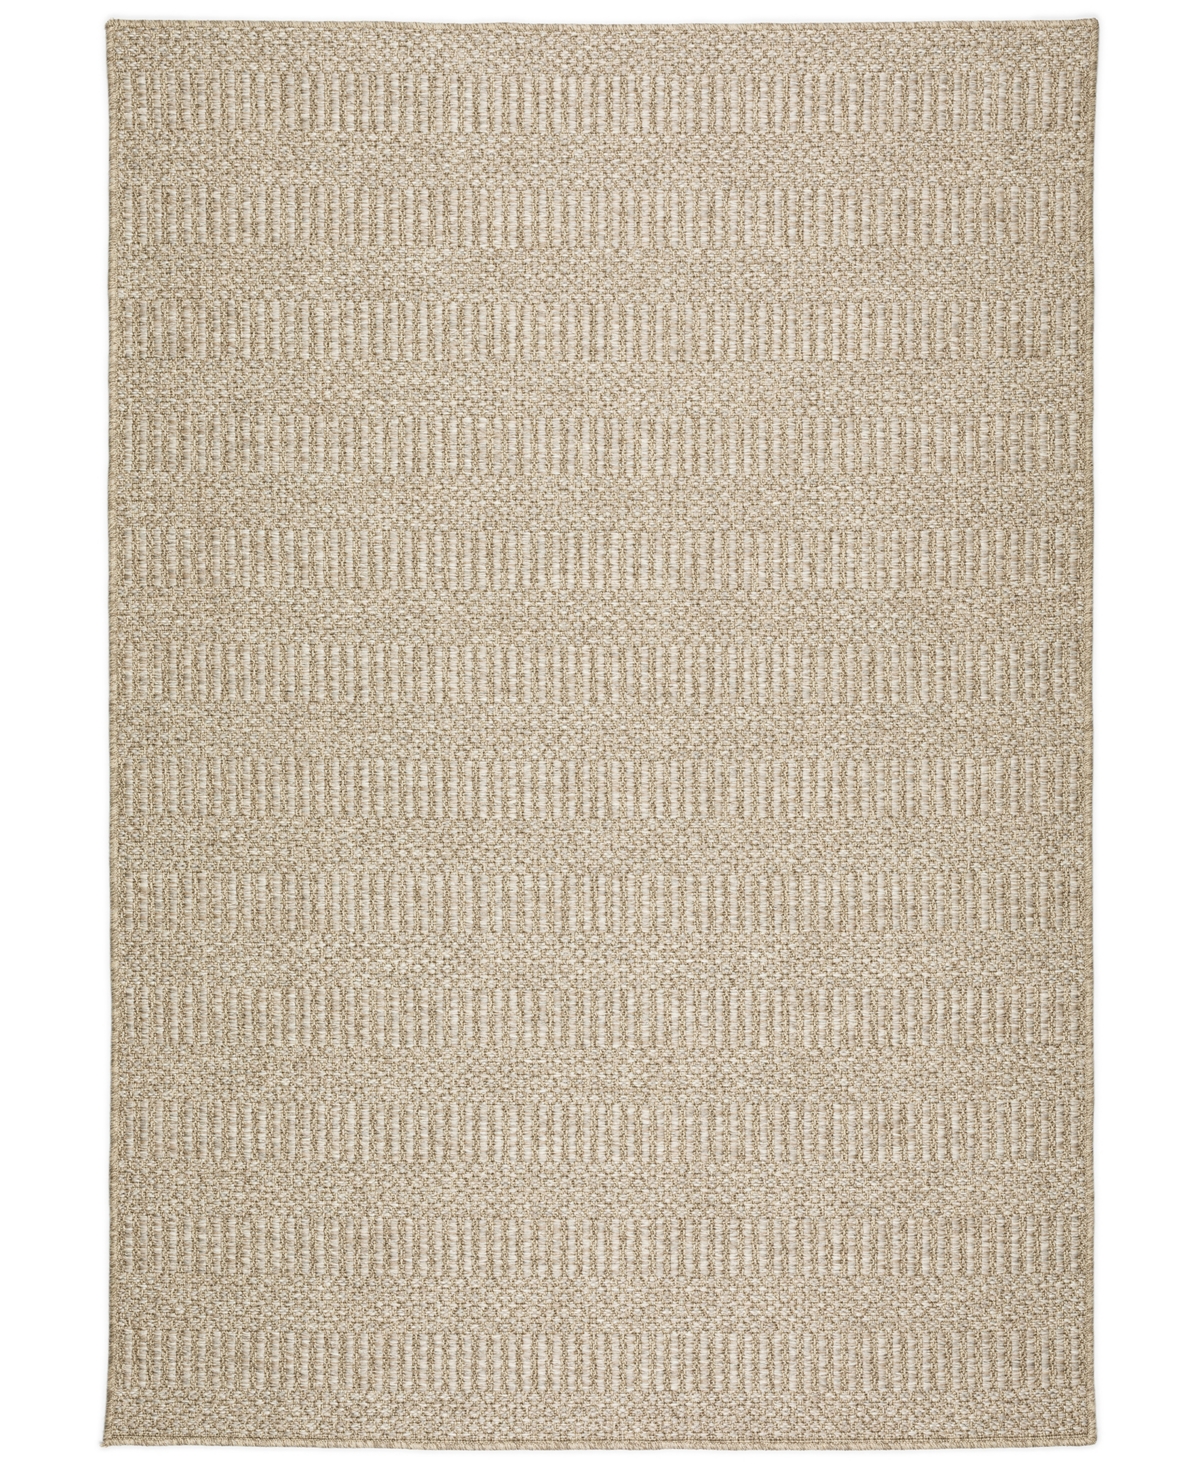 D Style Nusa Outdoor Nsa4 12' X 15' Area Rug In Beige